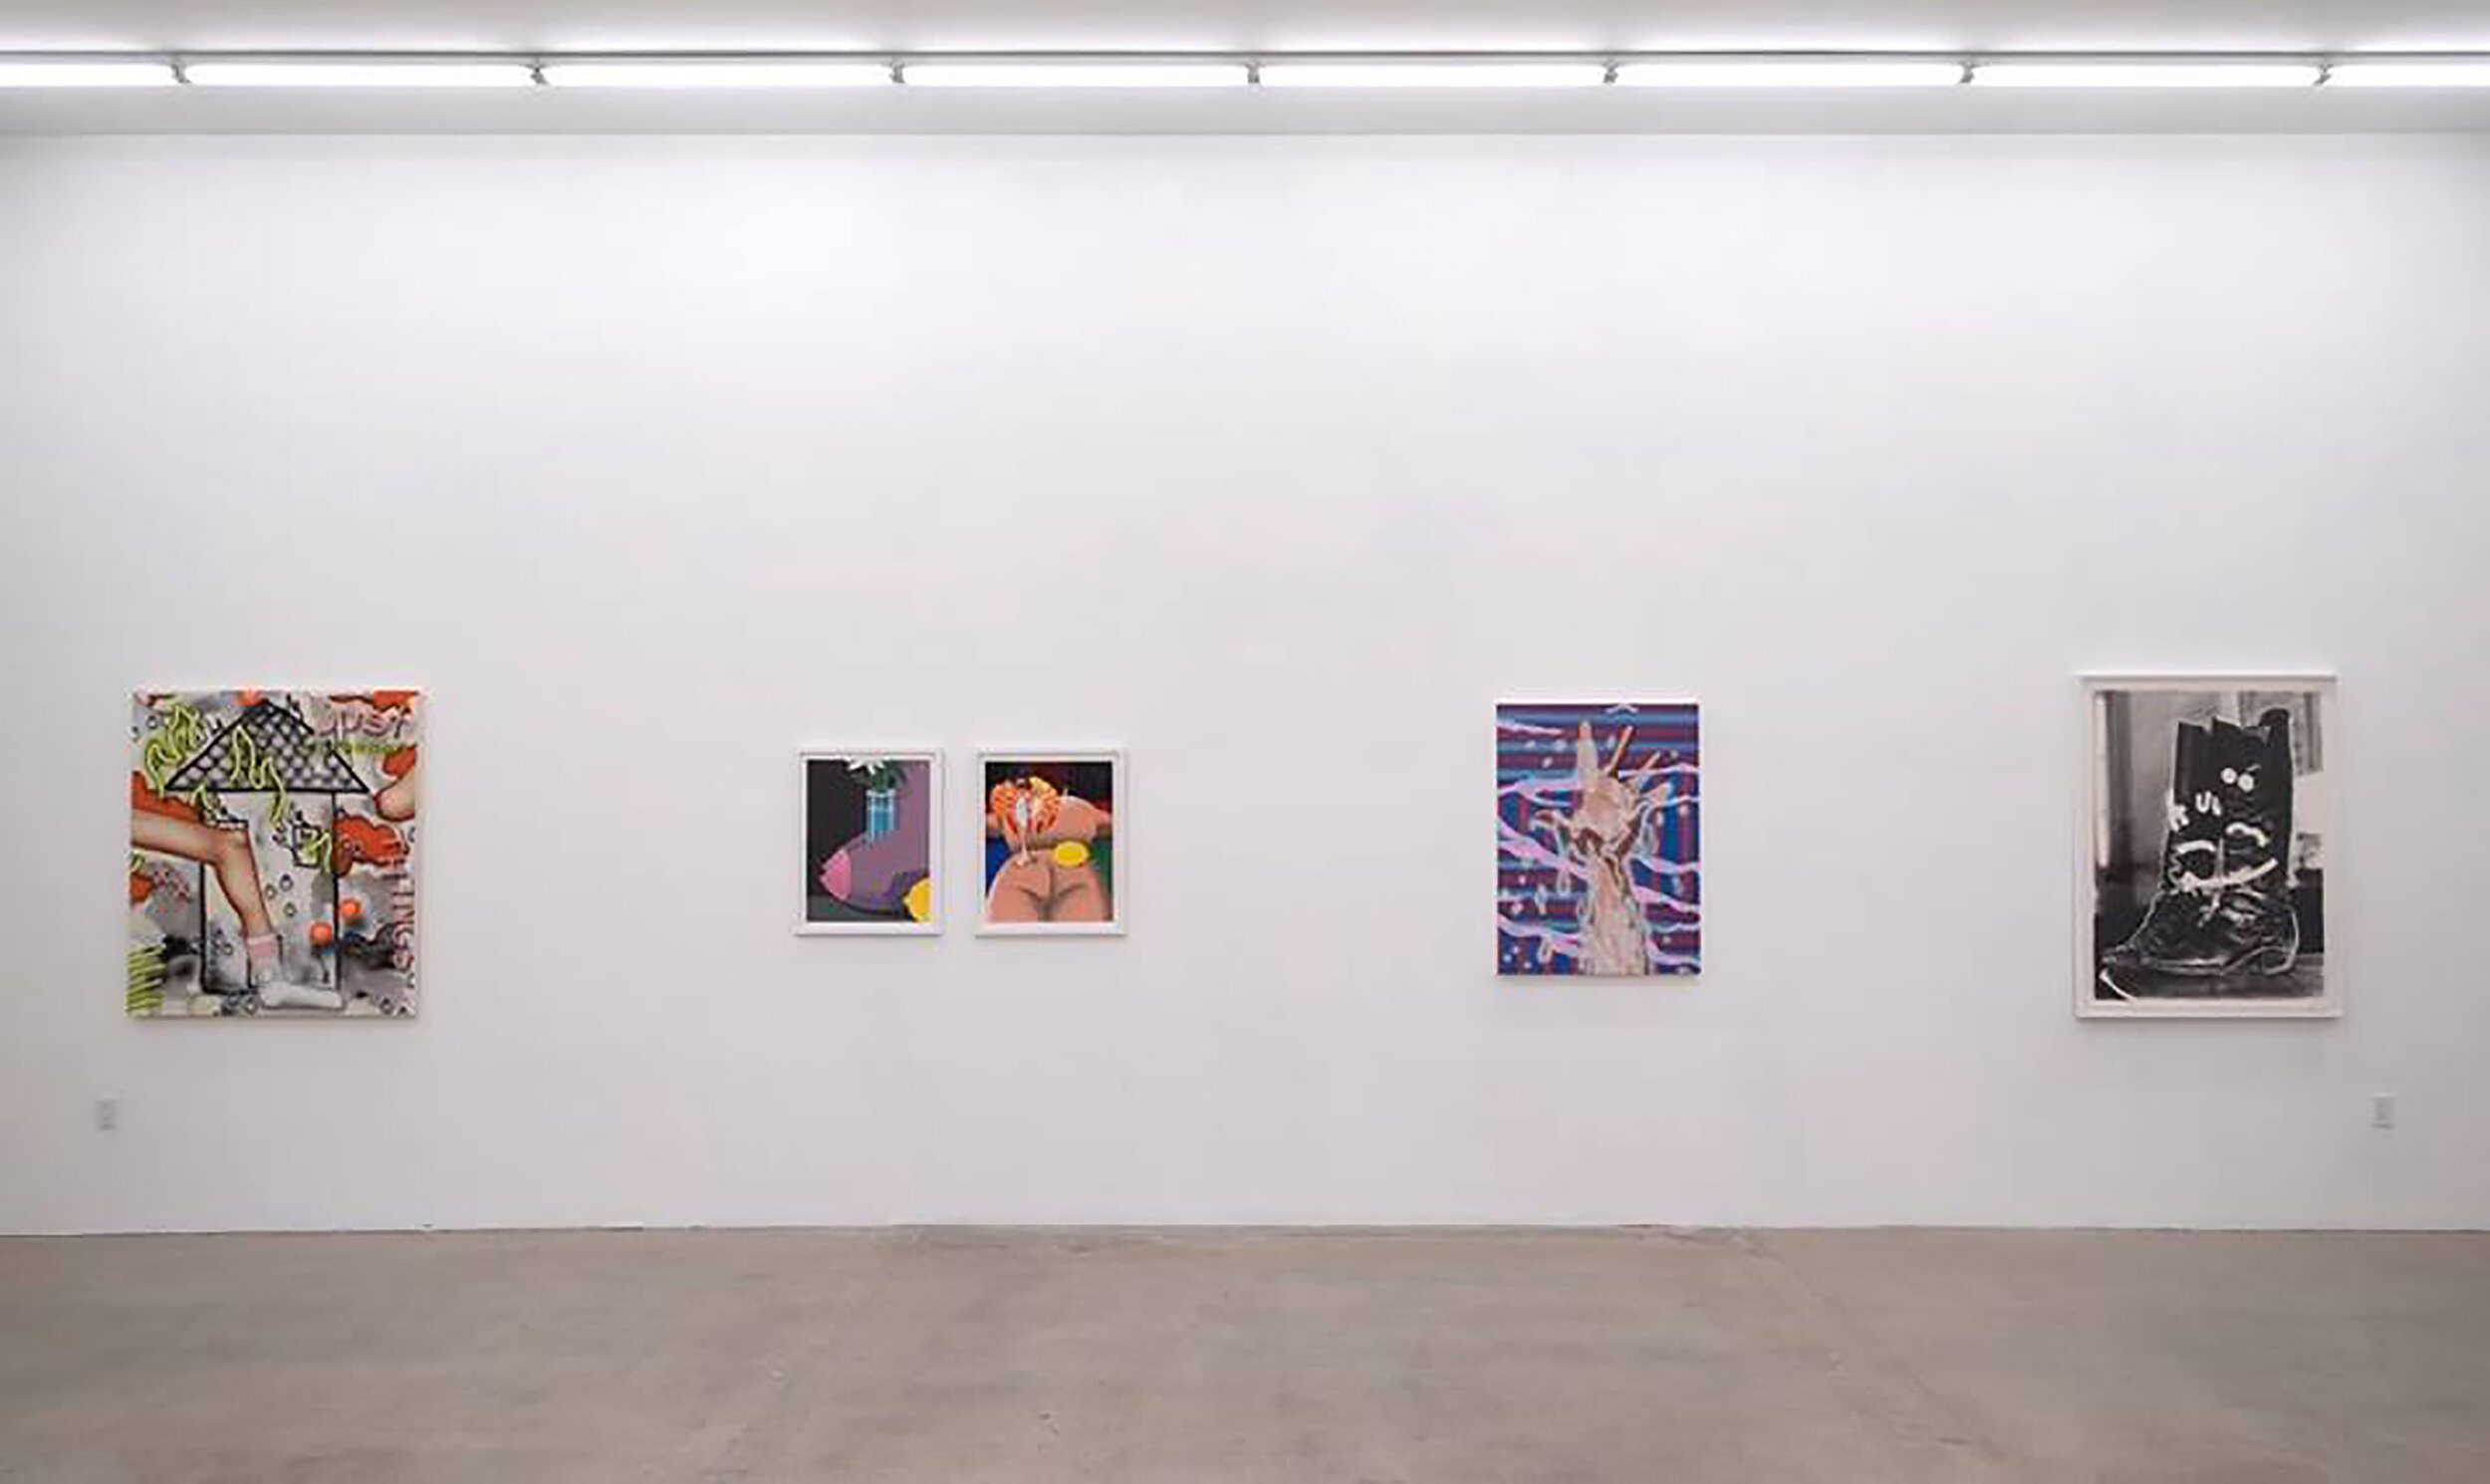   Olimpia’s Eyes , Installation view. Pictured: Josh Reames, Anthony Iacono, Michael Dotson, Eric Yahnker 